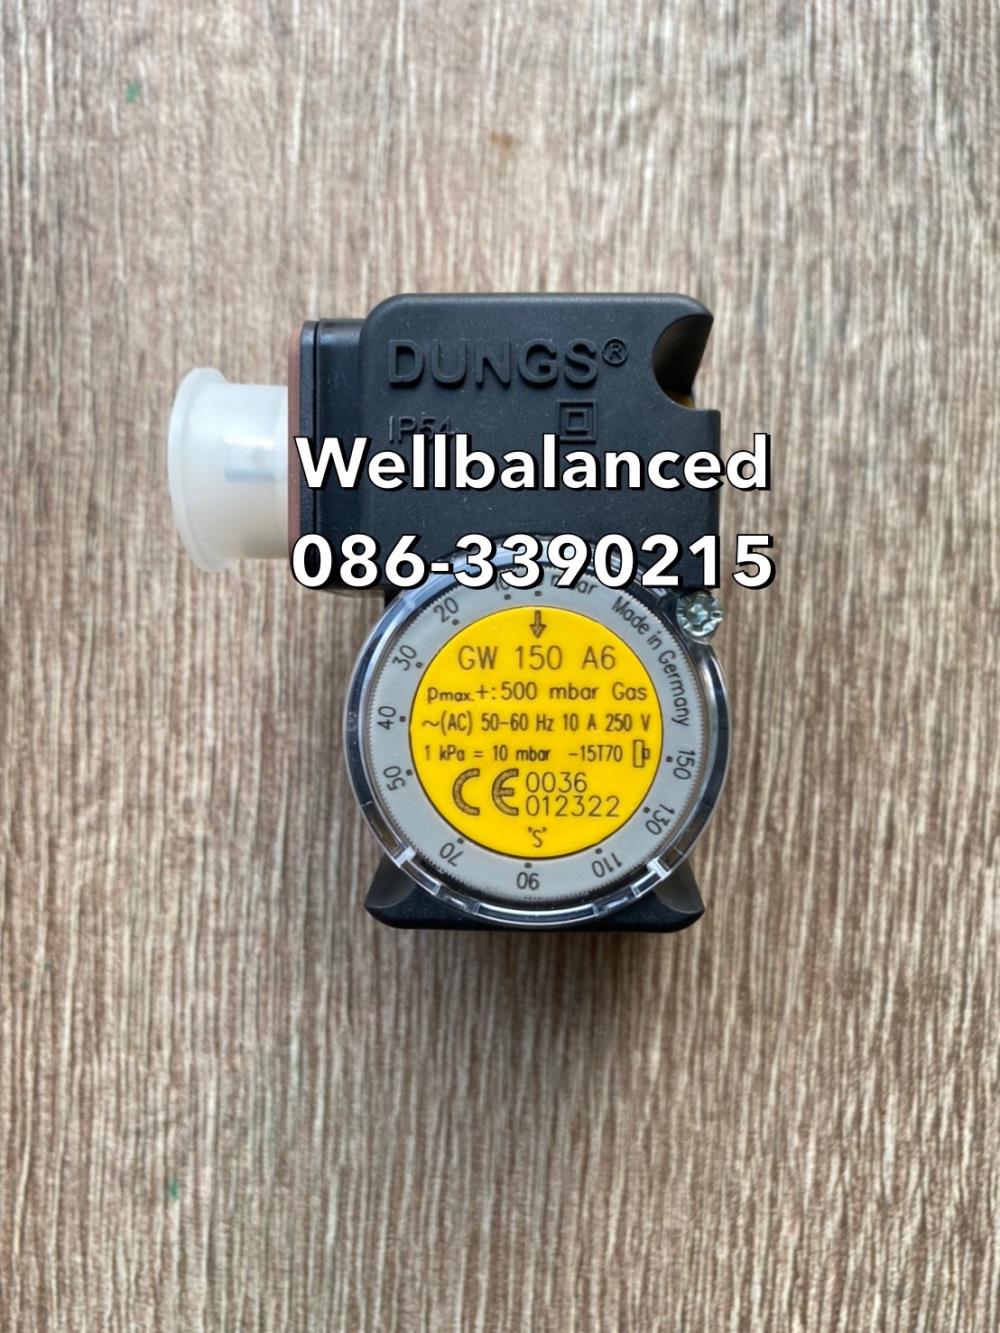 " DUNGS " Pressure Switch Model : GW 150 A6," DUNGS " Pressure Switch Model : GW 150 A6," DUNGS " Pressure Switch Model : GW 150 A6,Instruments and Controls/Switches